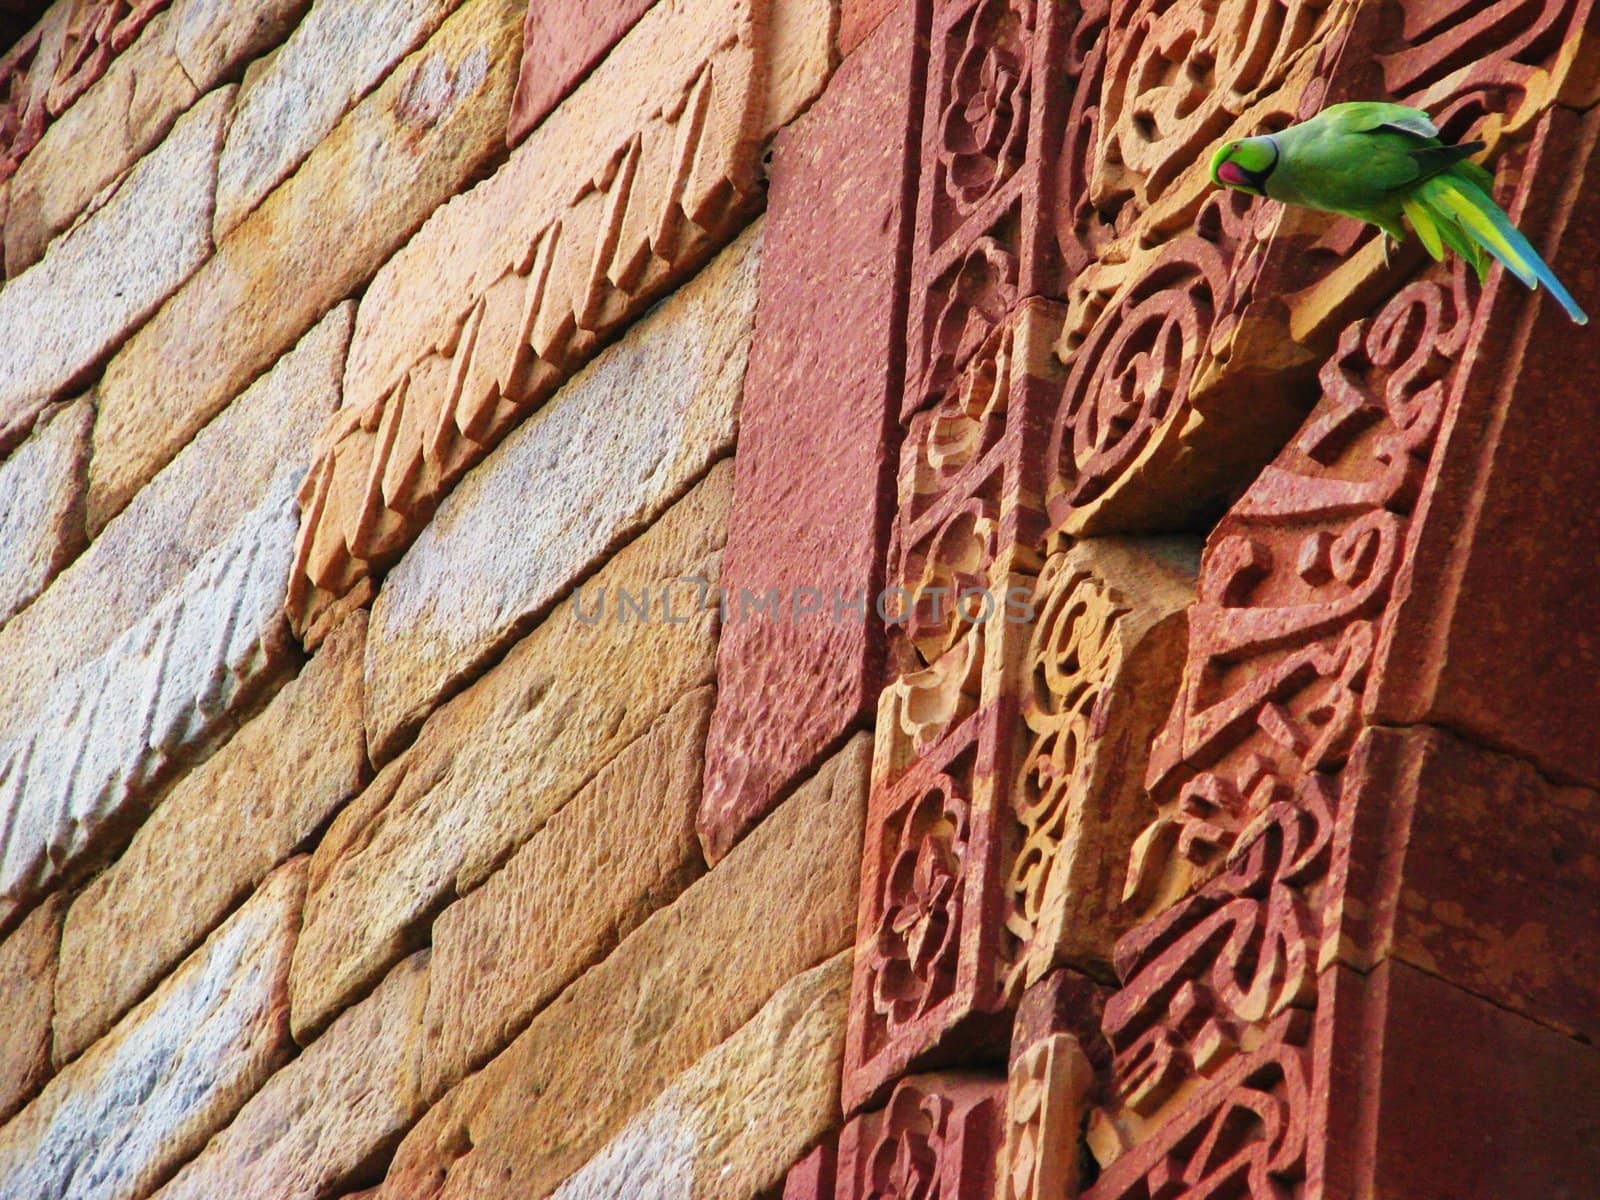 A parrot sitting on the carvings at Qutab Minar in New Delhi, India. by bellafotosolo